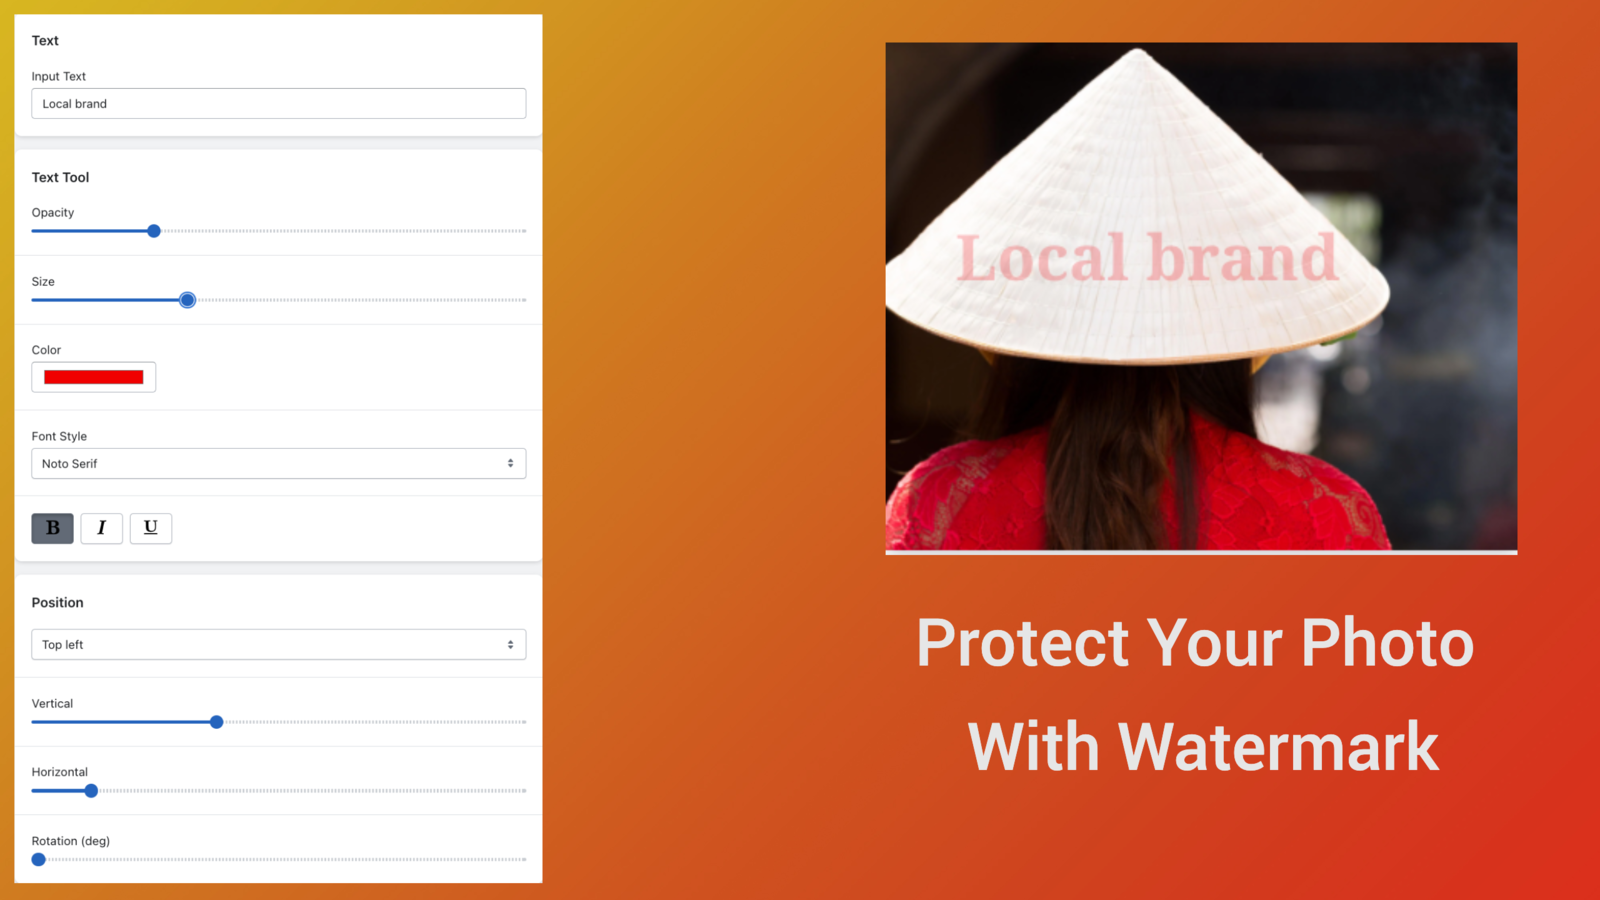 Protect Your Photo With Watermark